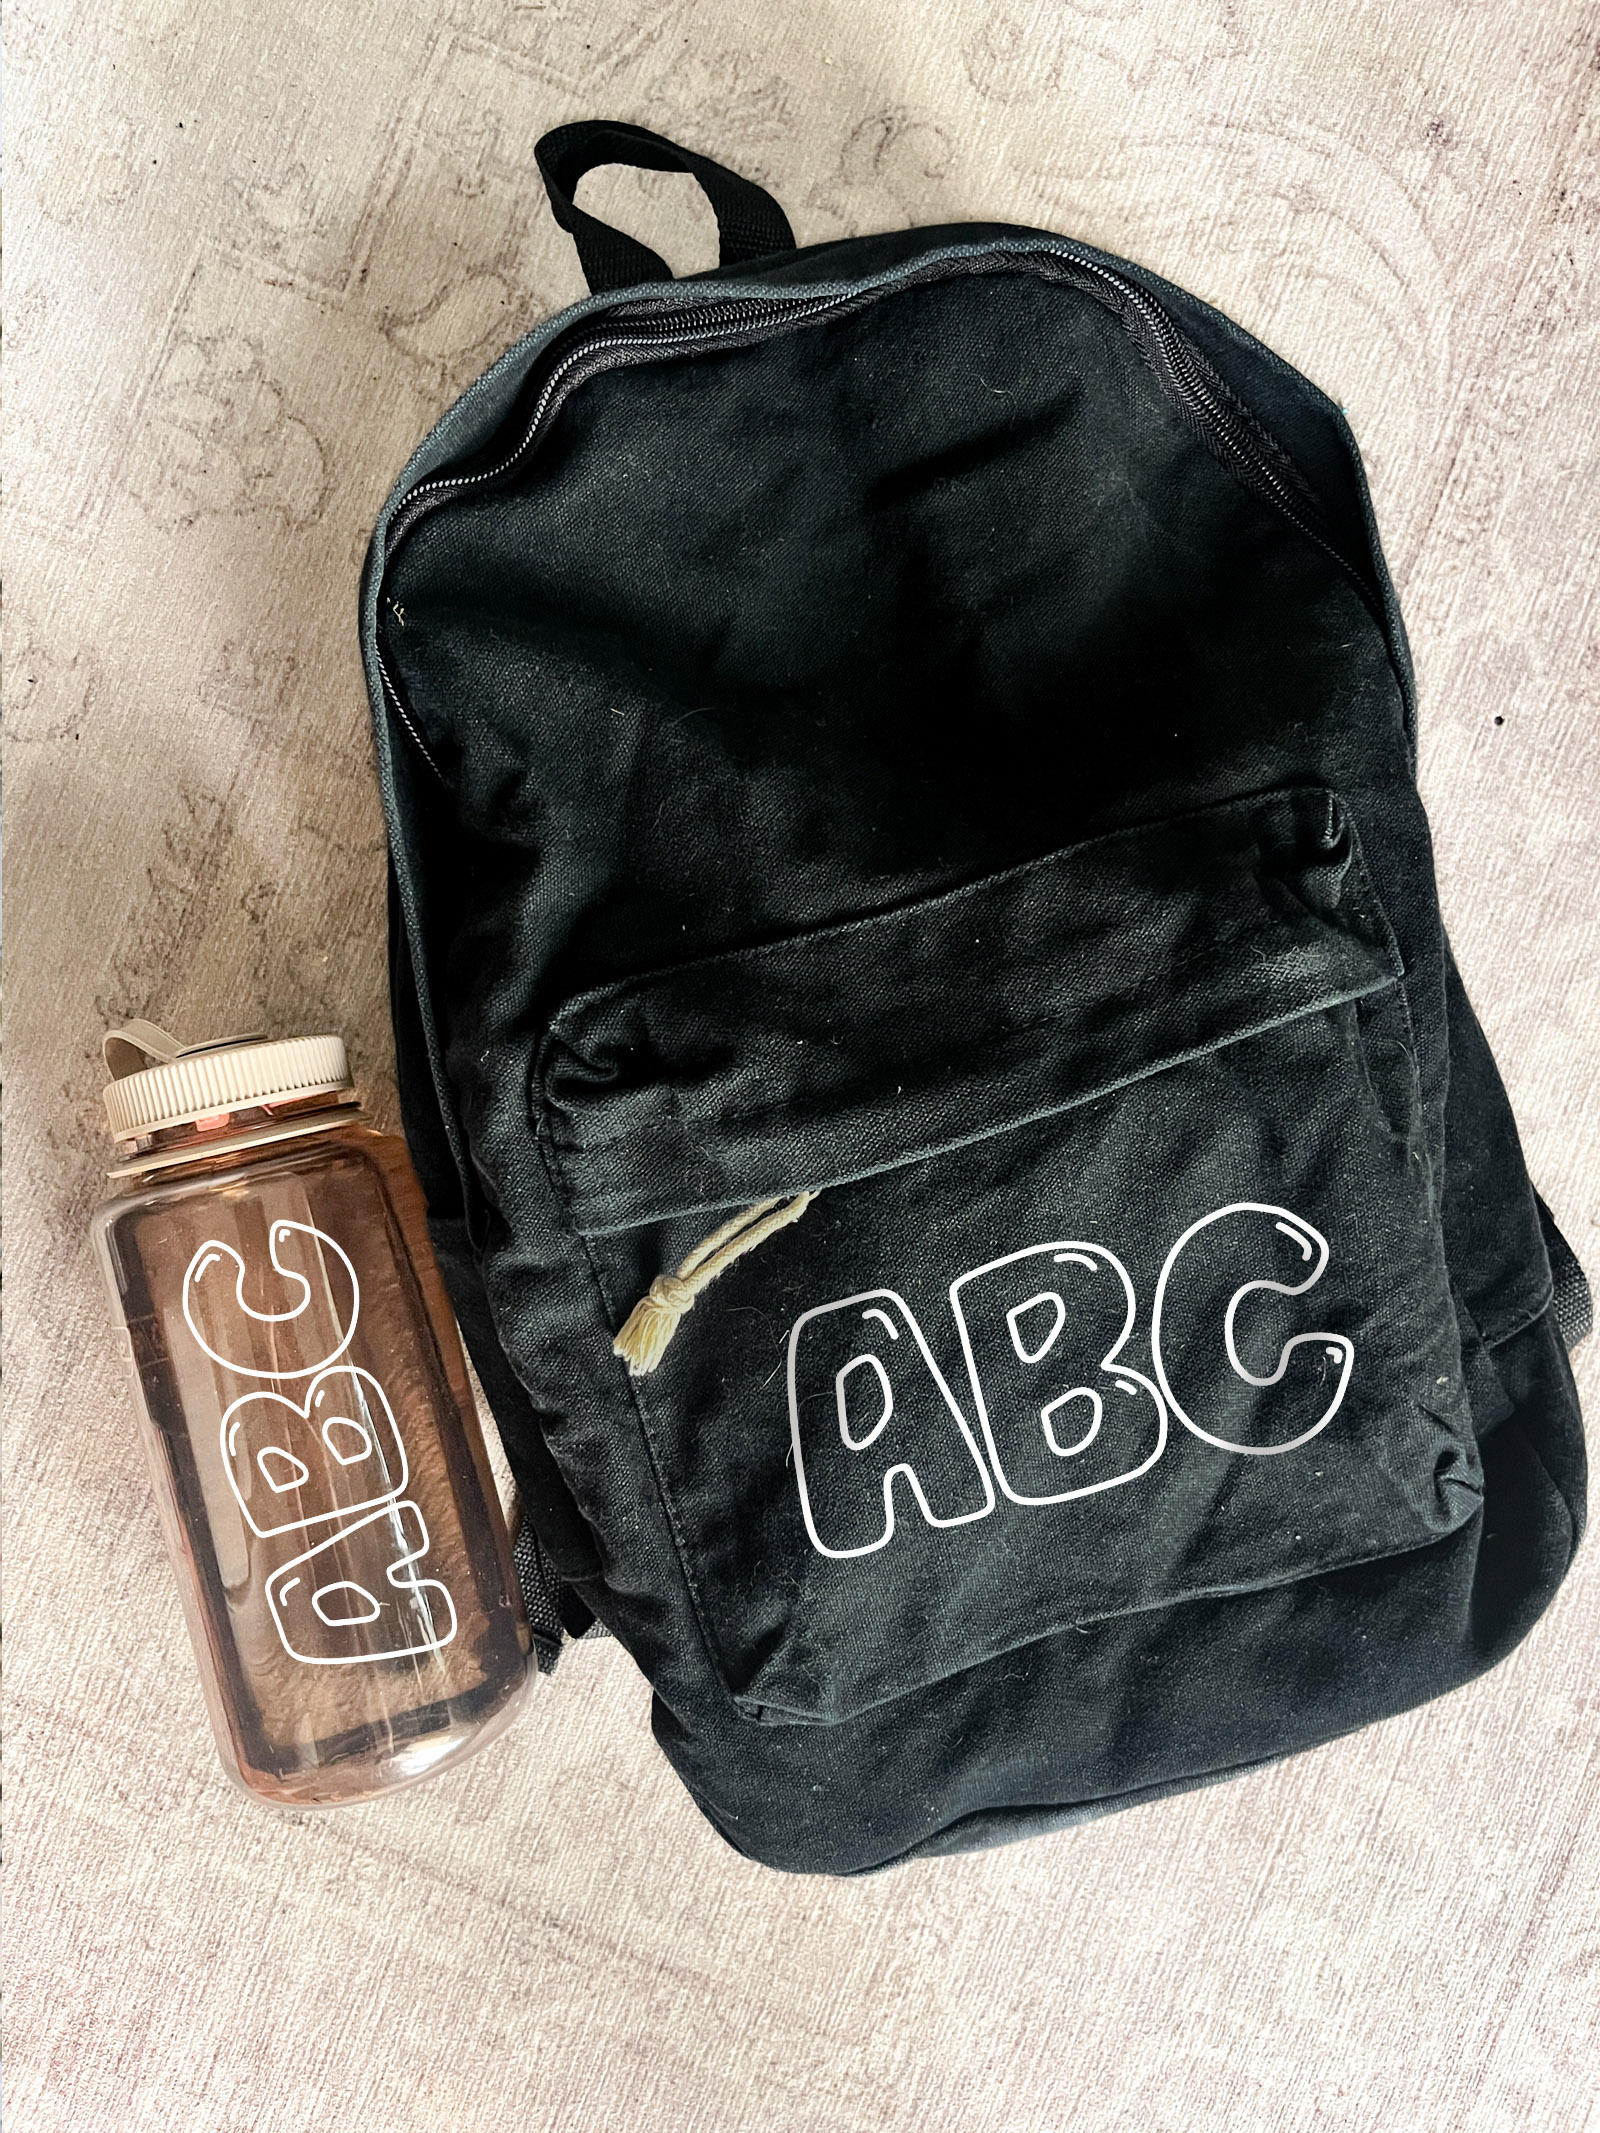 ABC decals on backpack and waterbottle- free SVG used